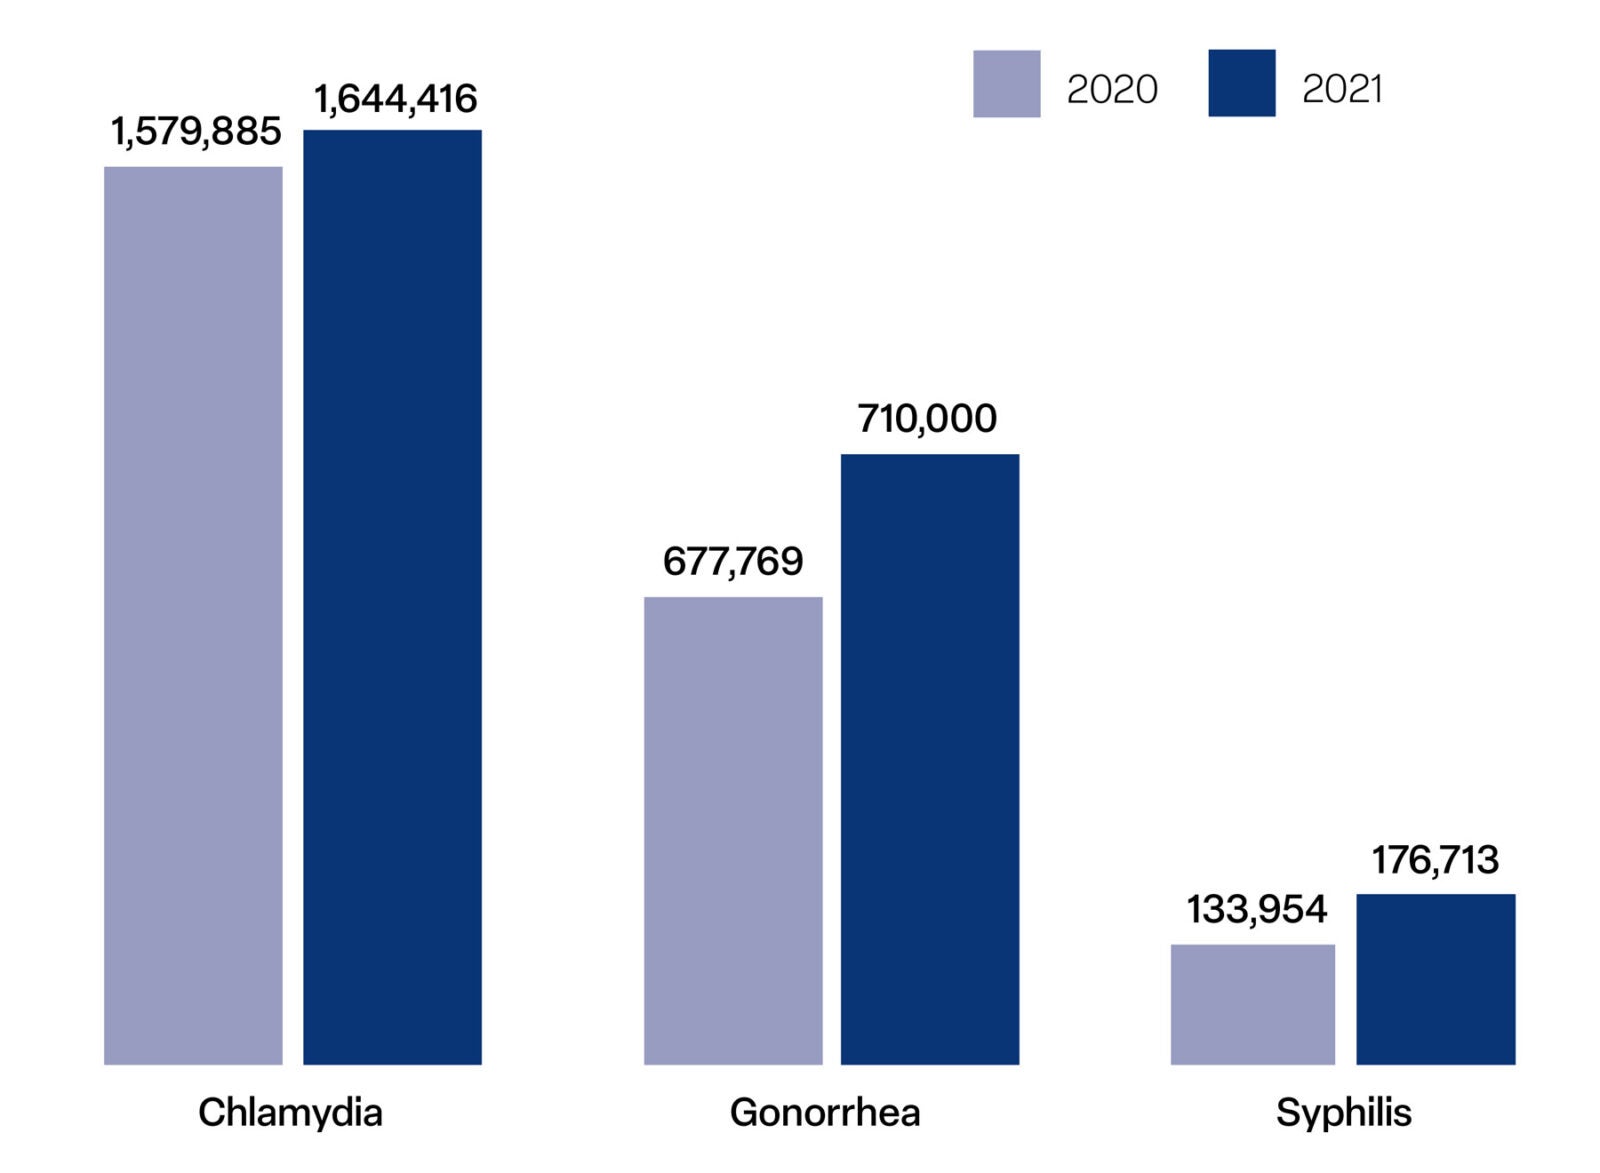 Bar chart comparing rates of chlamydia, gonorrhea and syphilis from 2020 to 2021.